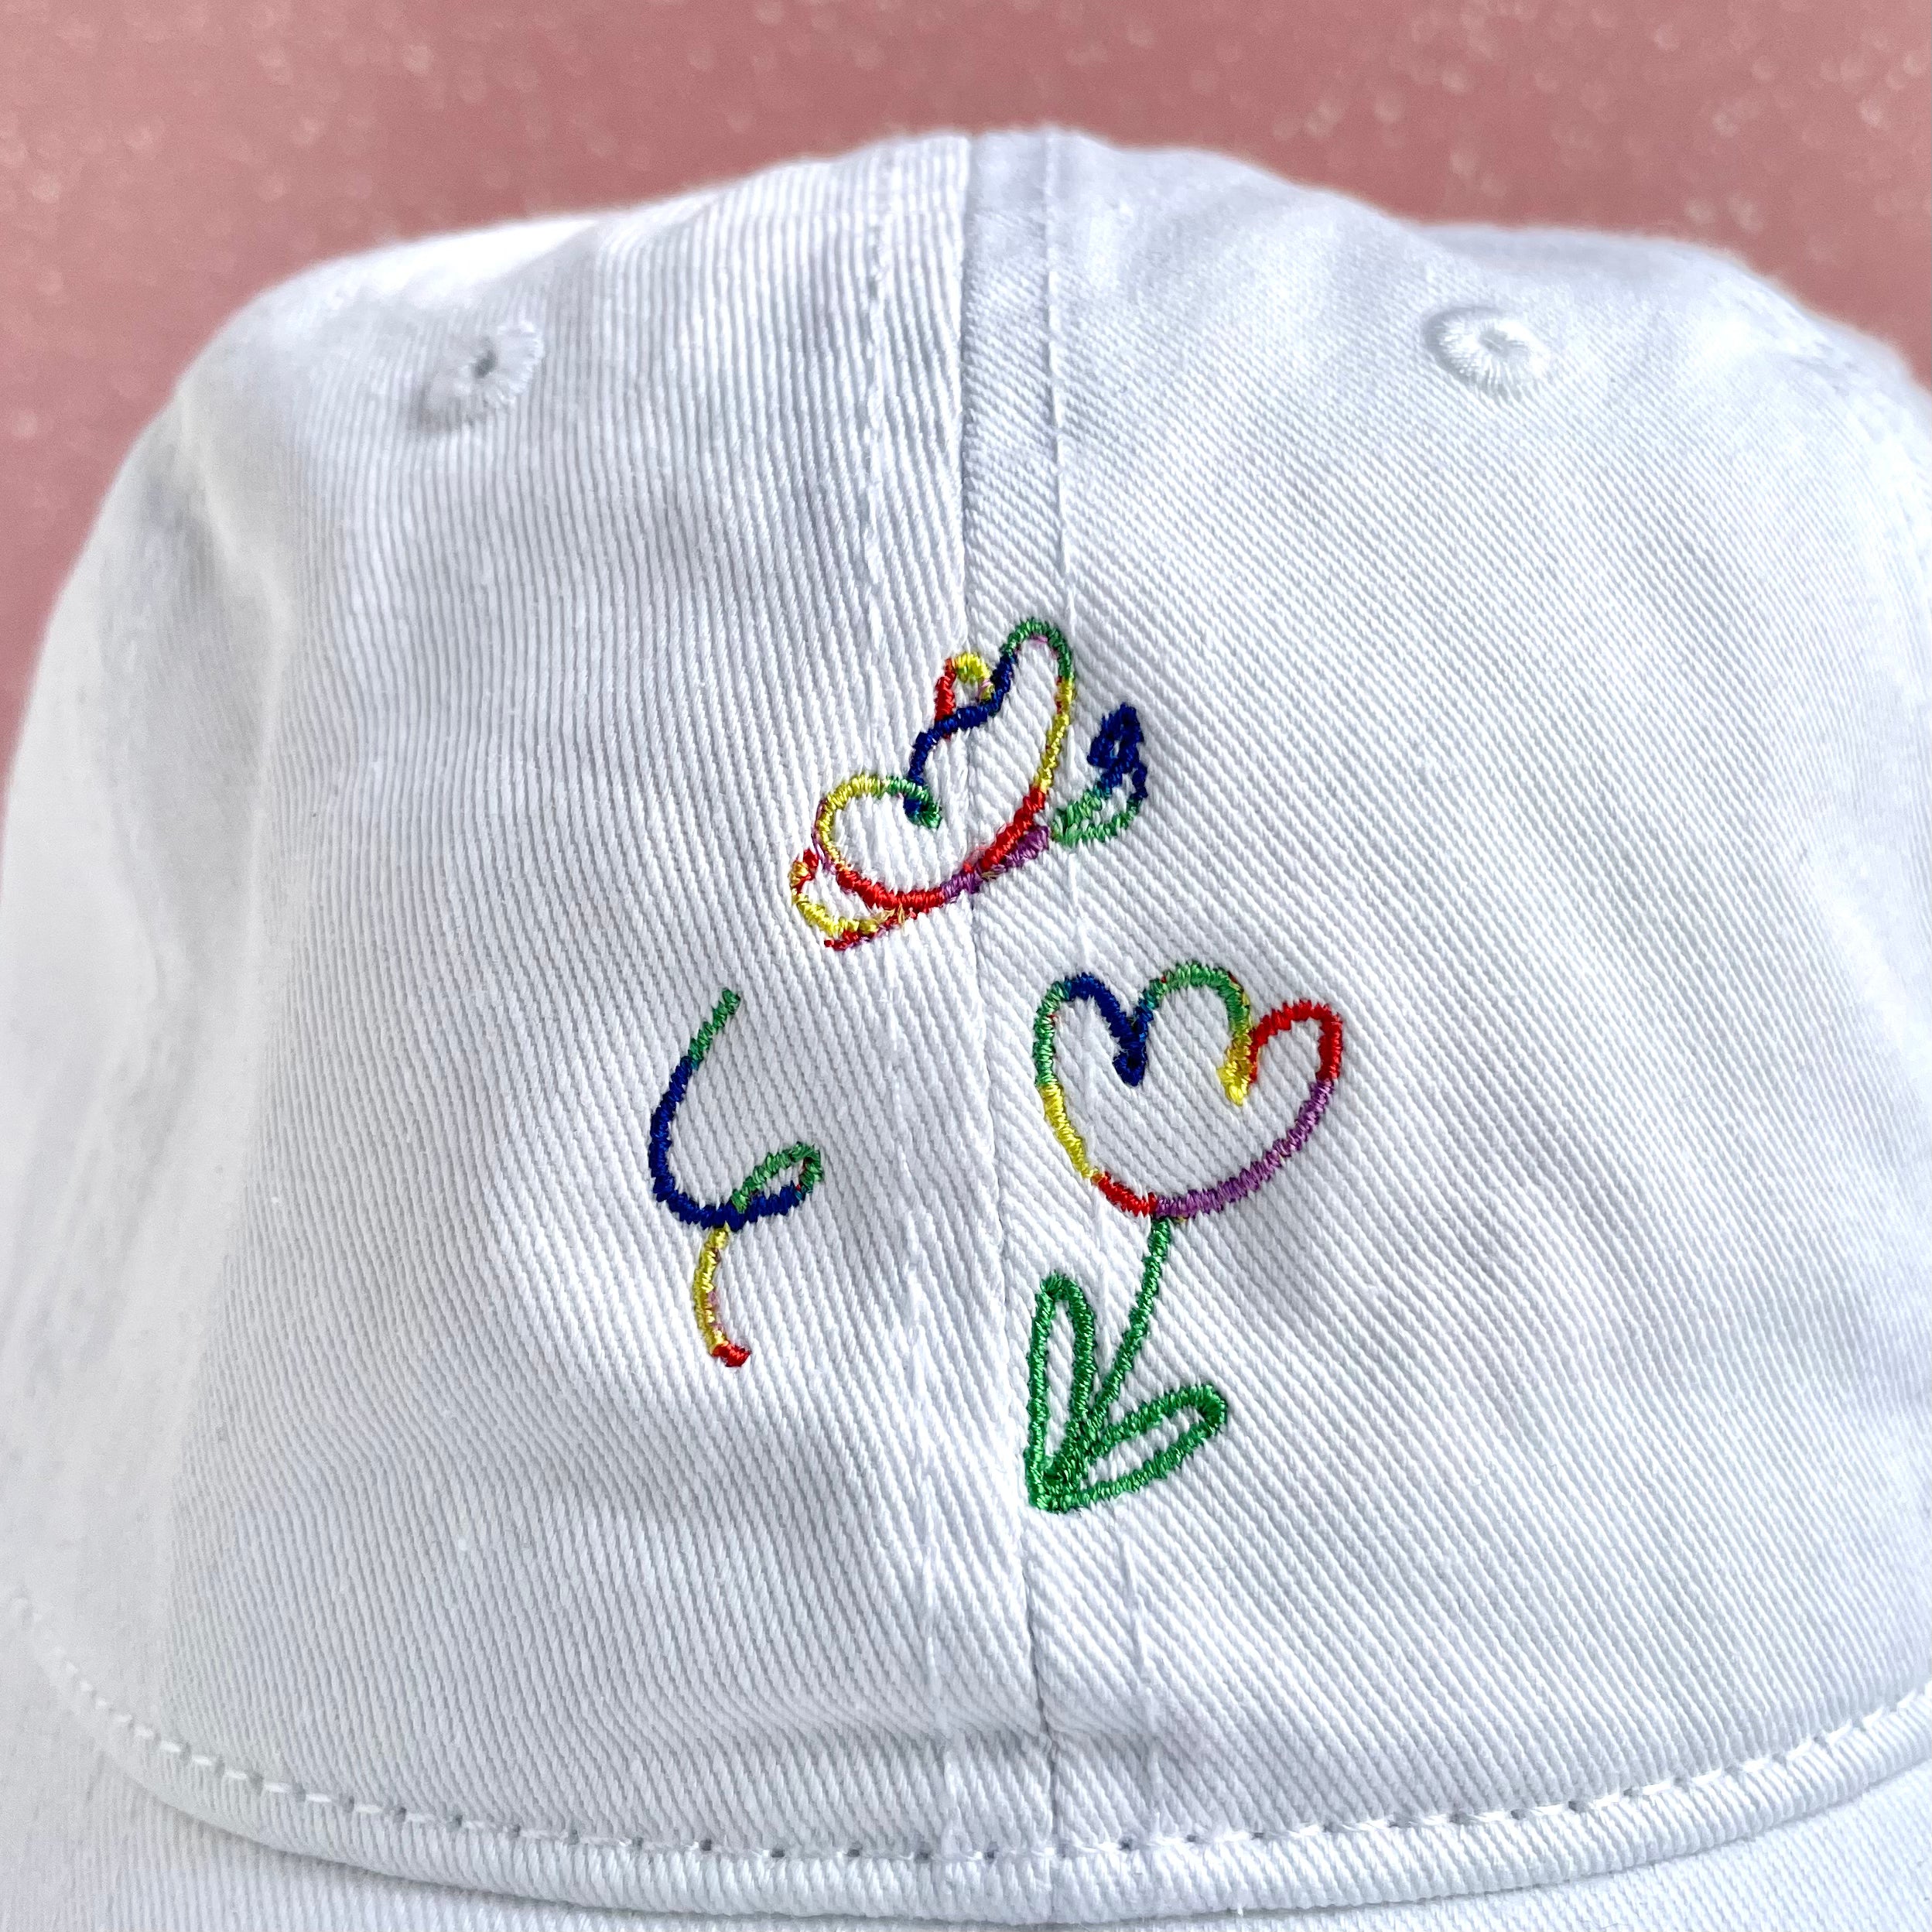 COLORFUL BUTTERFLY DAD HAT